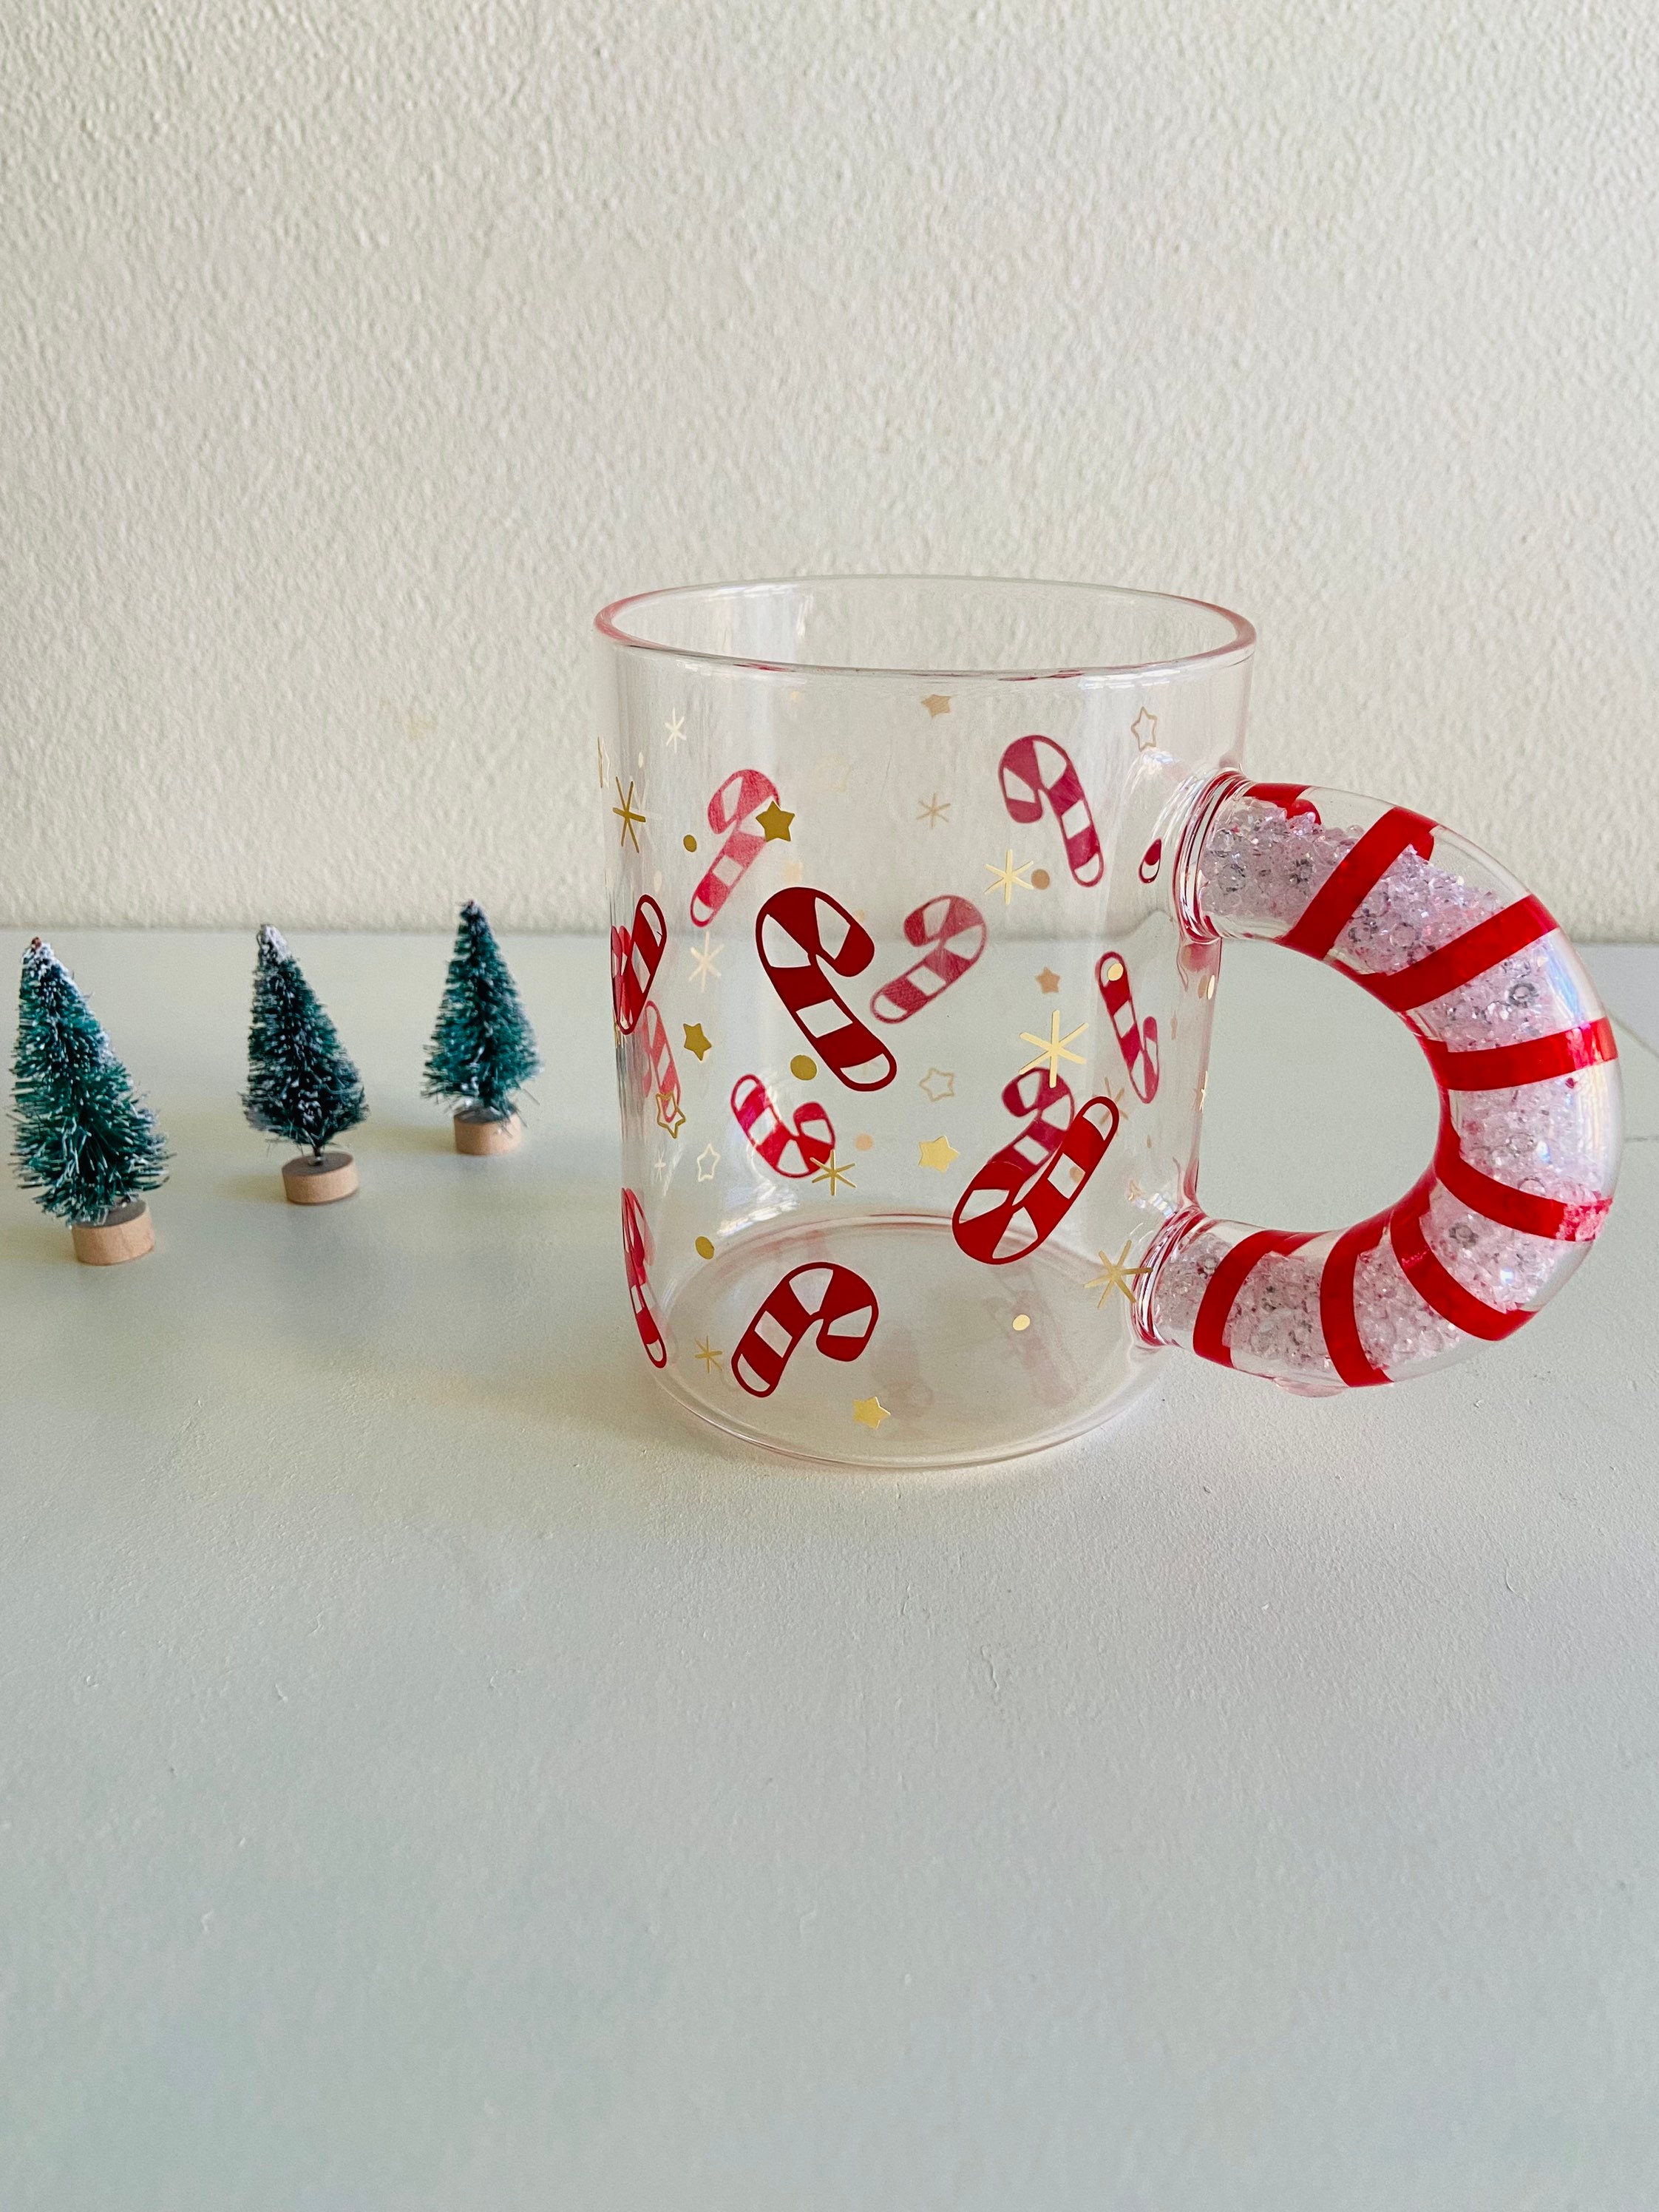 2 Irish Coffee Glasses Mugs With Etched Christmas Candy Canes 5 1/2